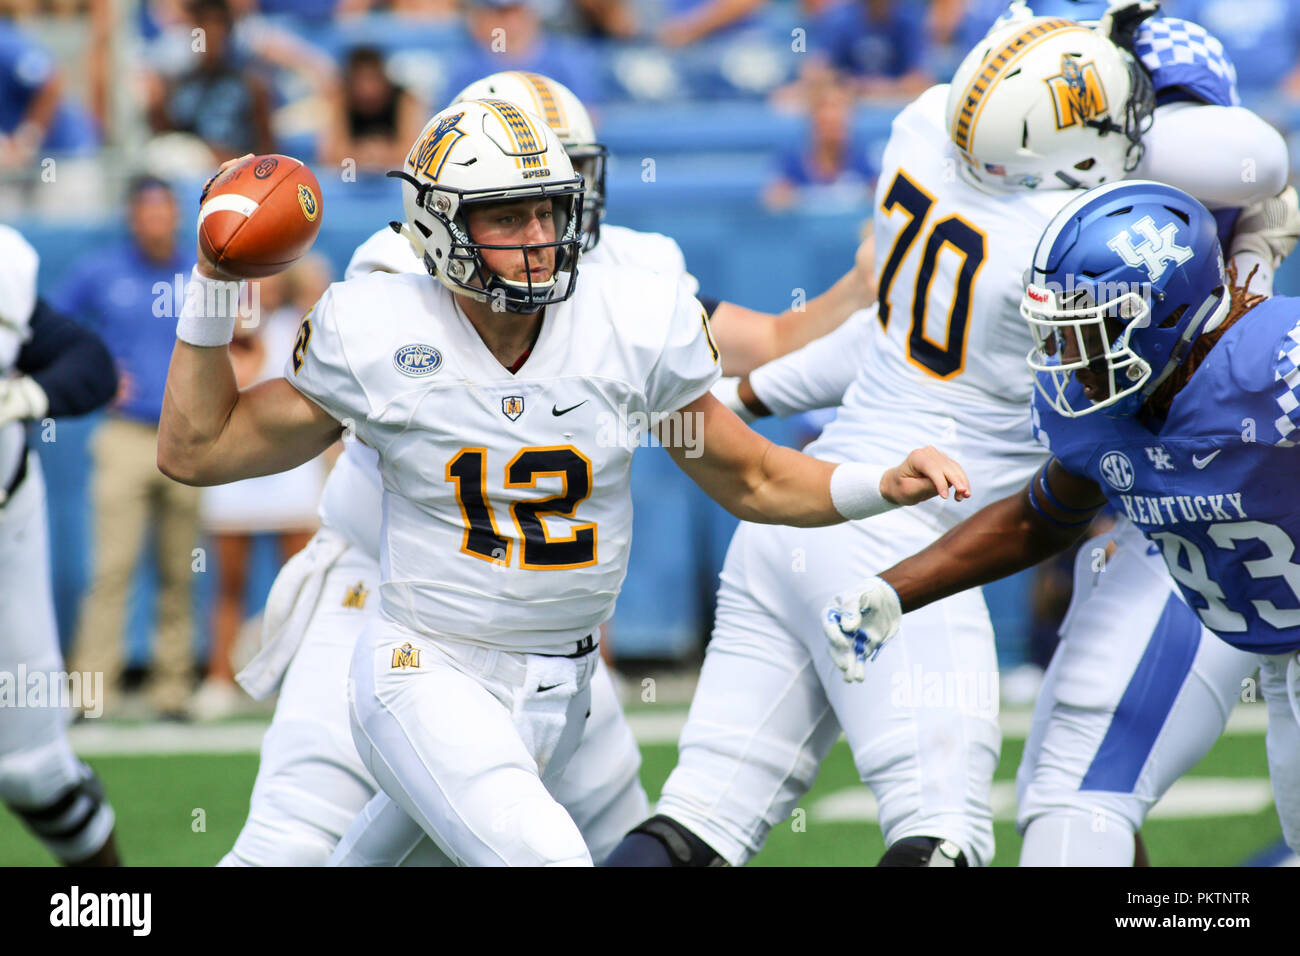 Lexington, Kentucky, USA. 15th Sep, 2018. Murray State Racers QB Drew Anderson throws the ball during an NCAA football game between the Kentucky Wildcats and the Murray State Racers at Kroger Field in Lexington, Kentucky. Kevin Schultz/CSM/Alamy Live News Stock Photo